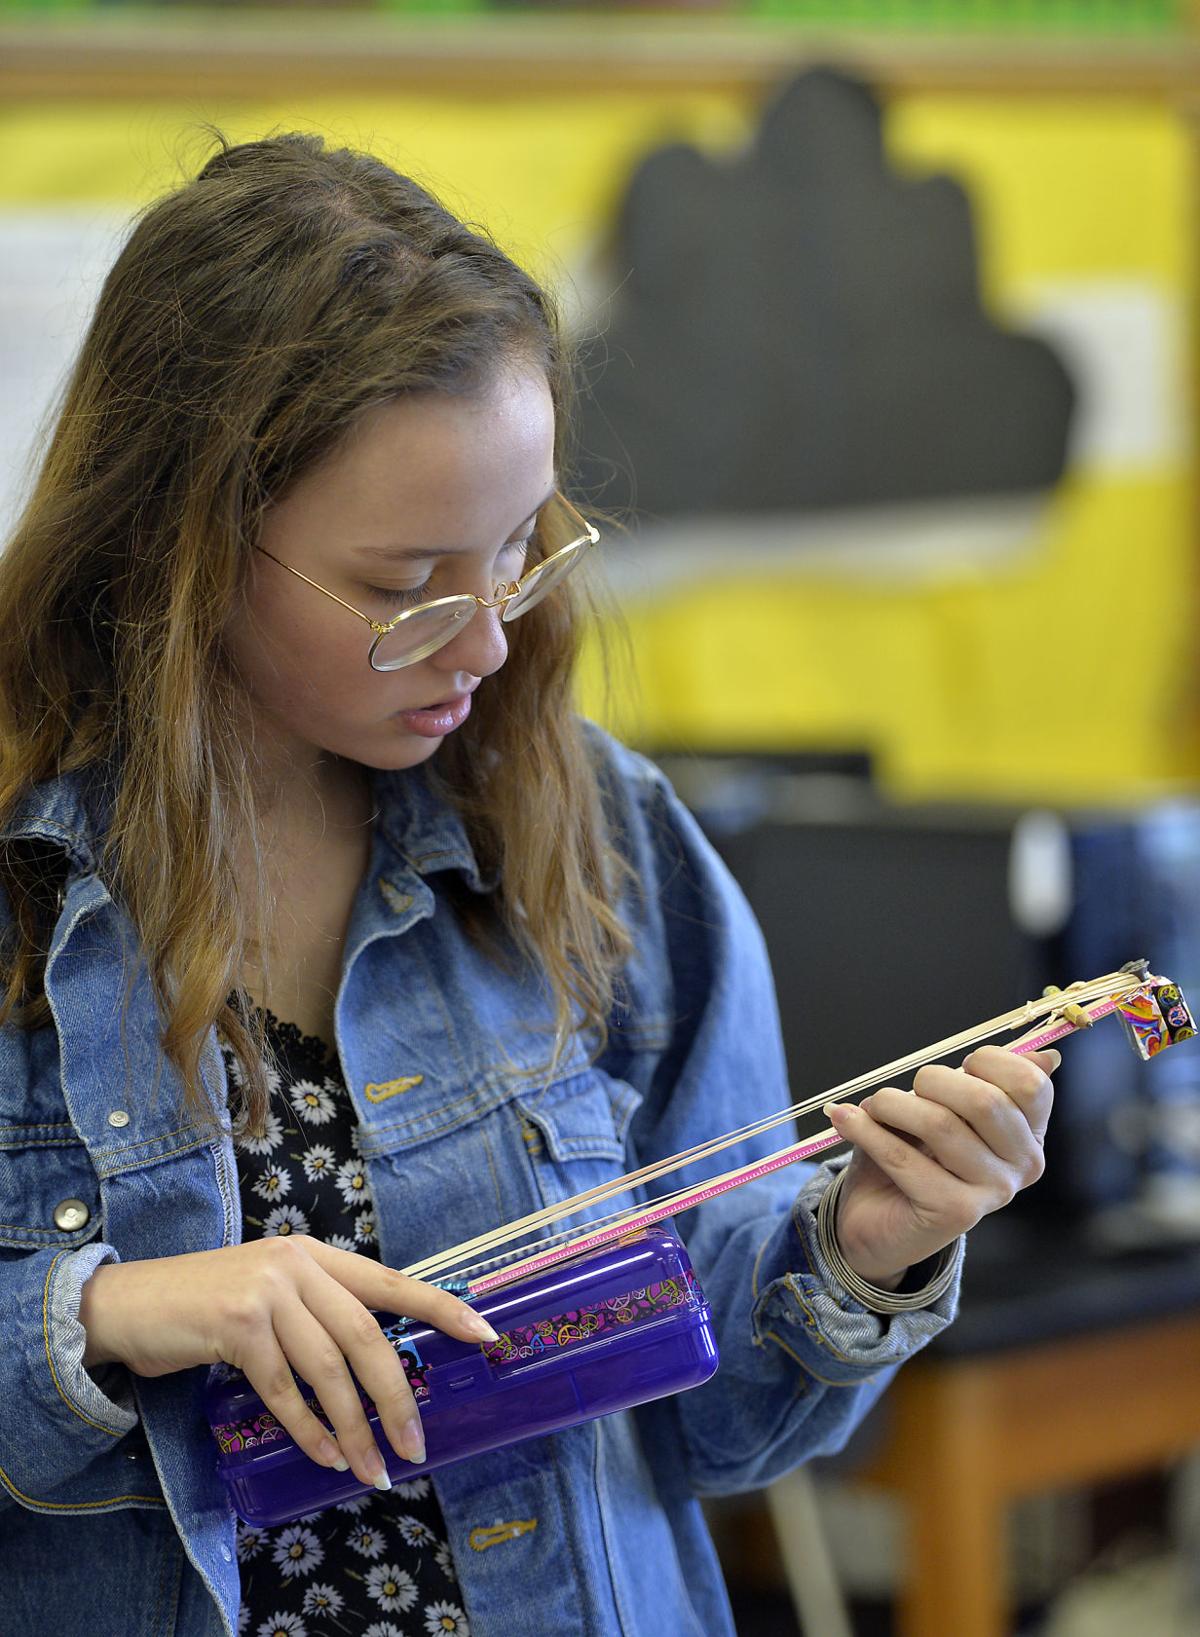 KTECEast students design, build instruments while learning about sound